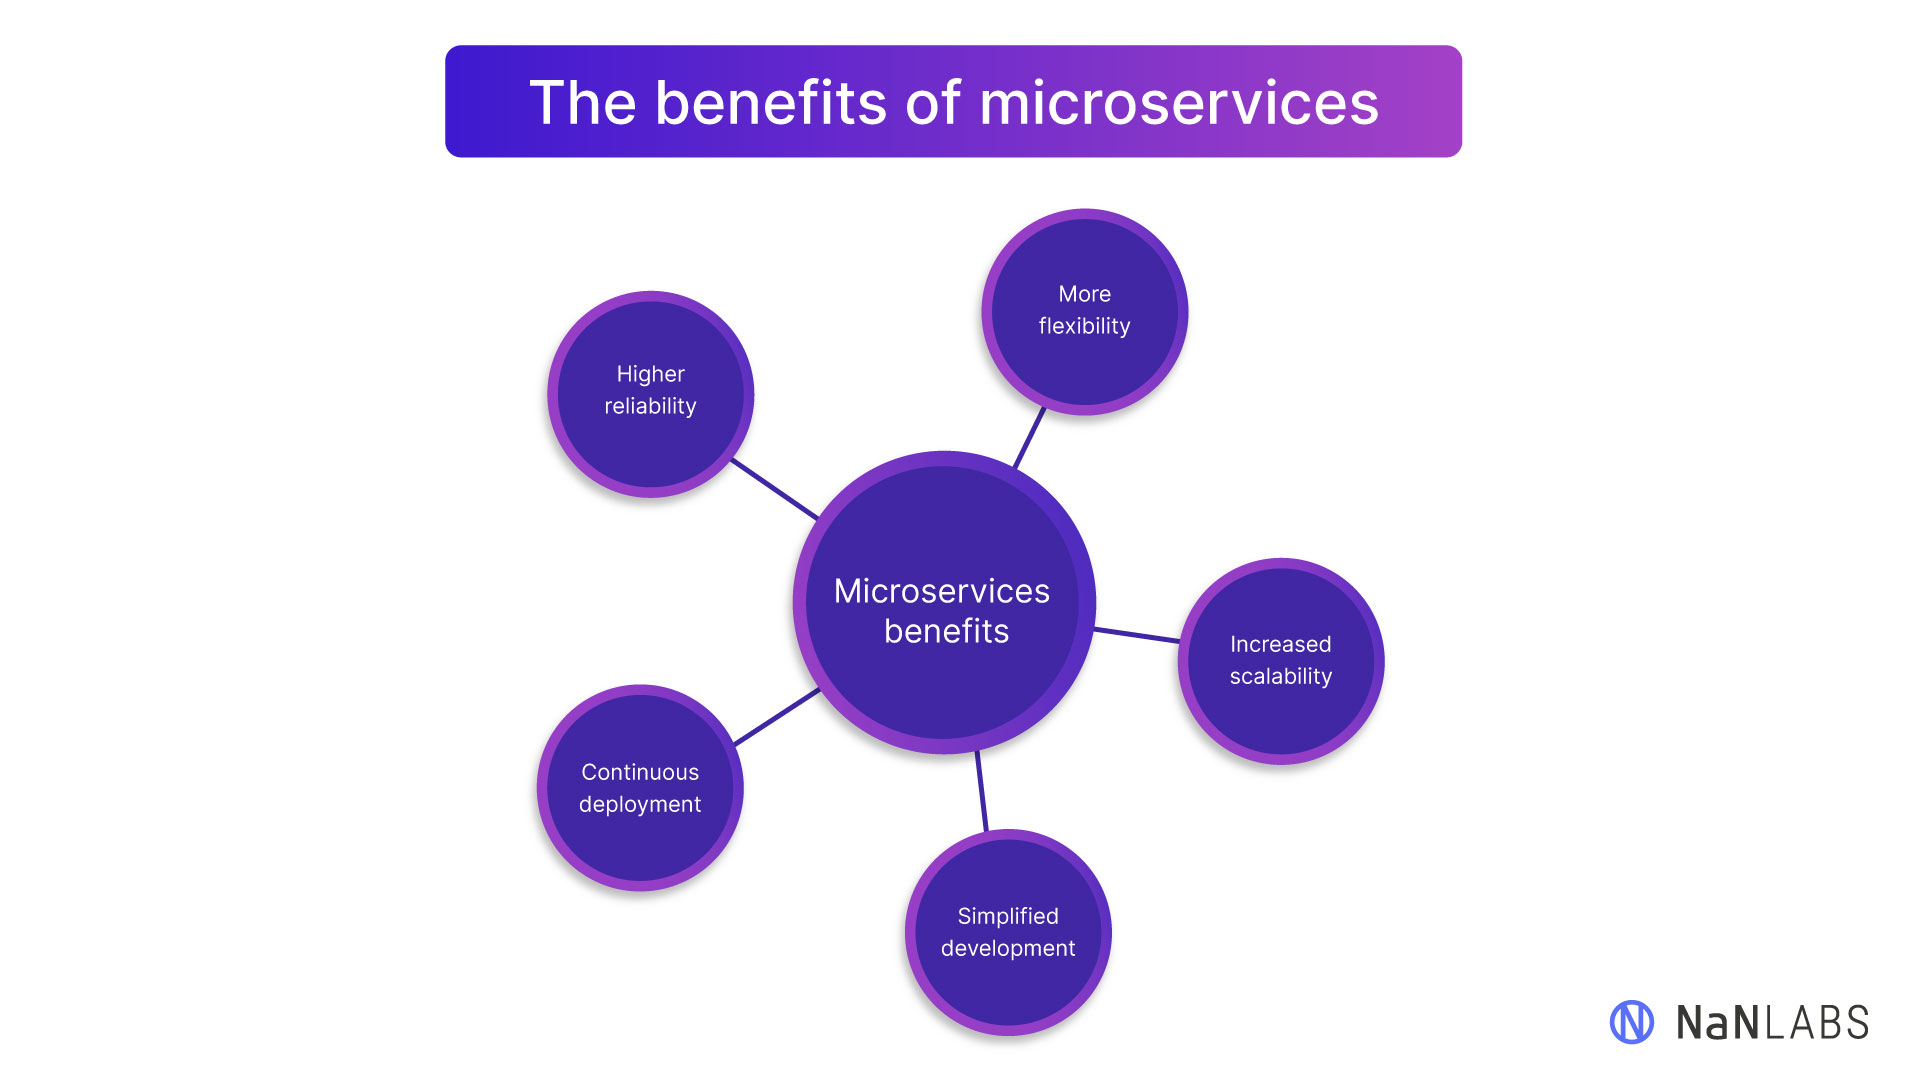 A radial list showing five benefits of using microservices: more flexibility, increased scalability, simplified development, continuous deployment, and higher reliability.